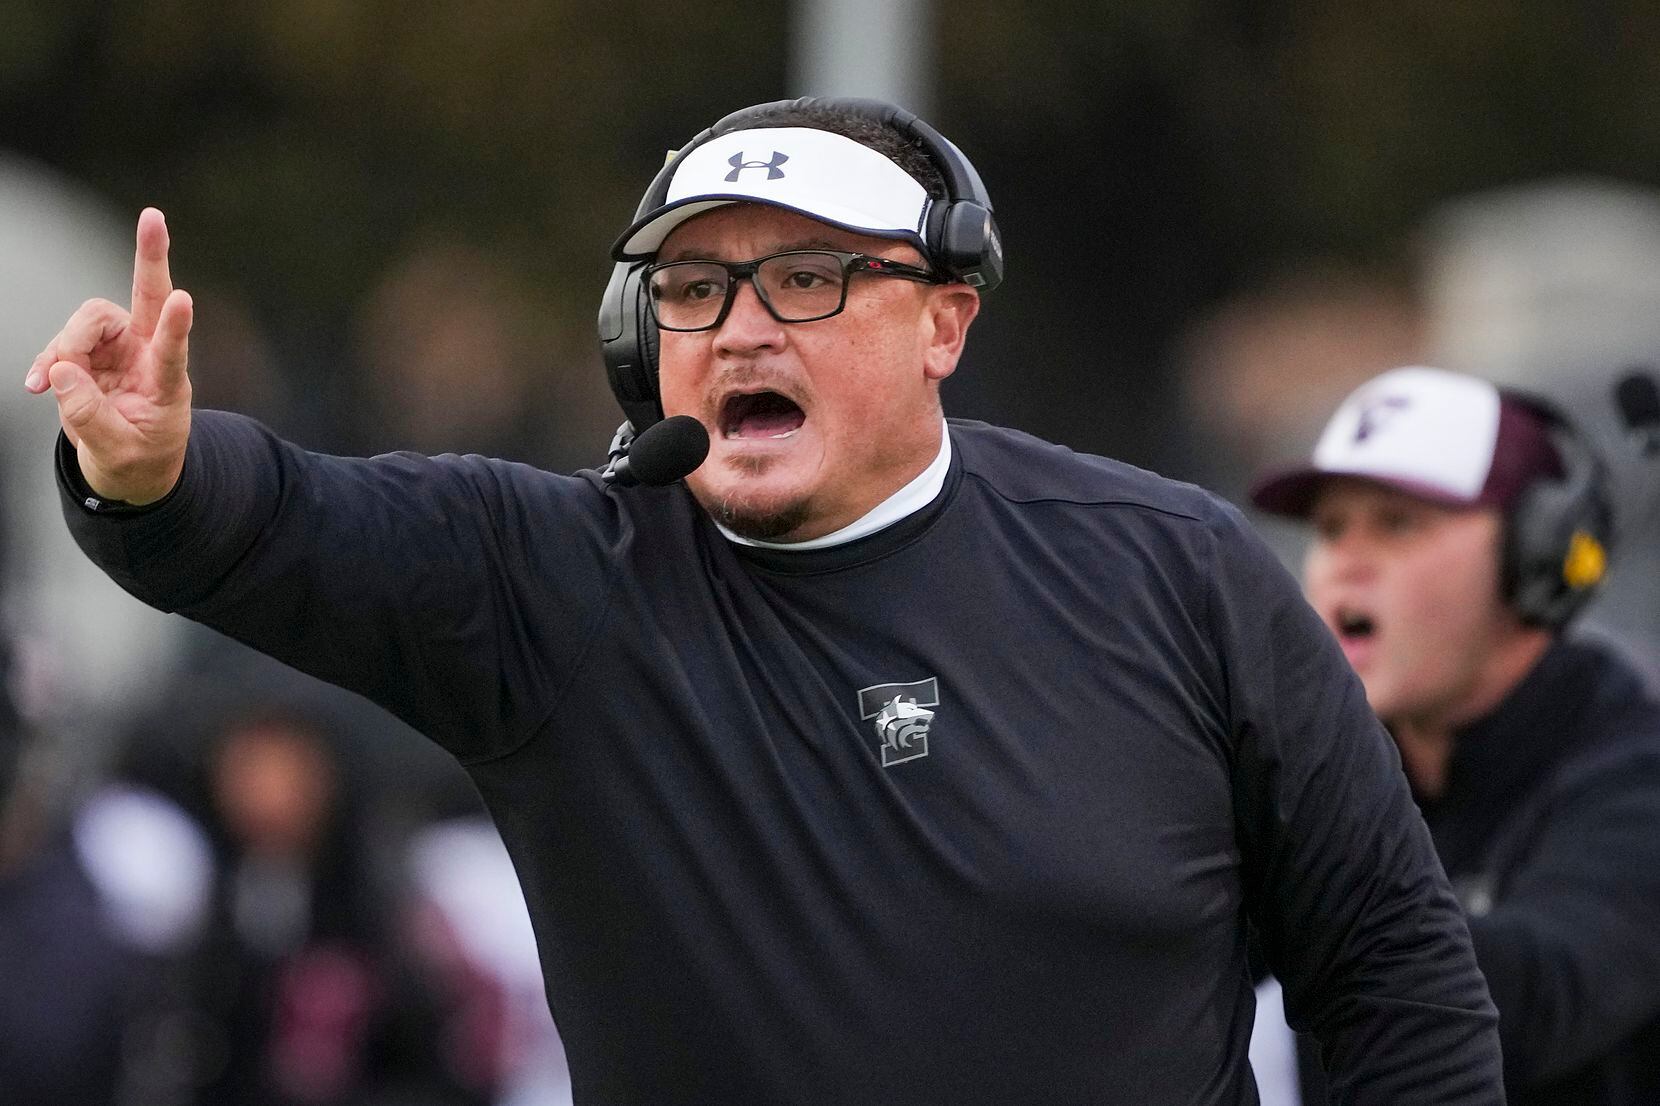 Mansfield Timberview head coach James Brown calls for a 2-point attempt after a touchdown...